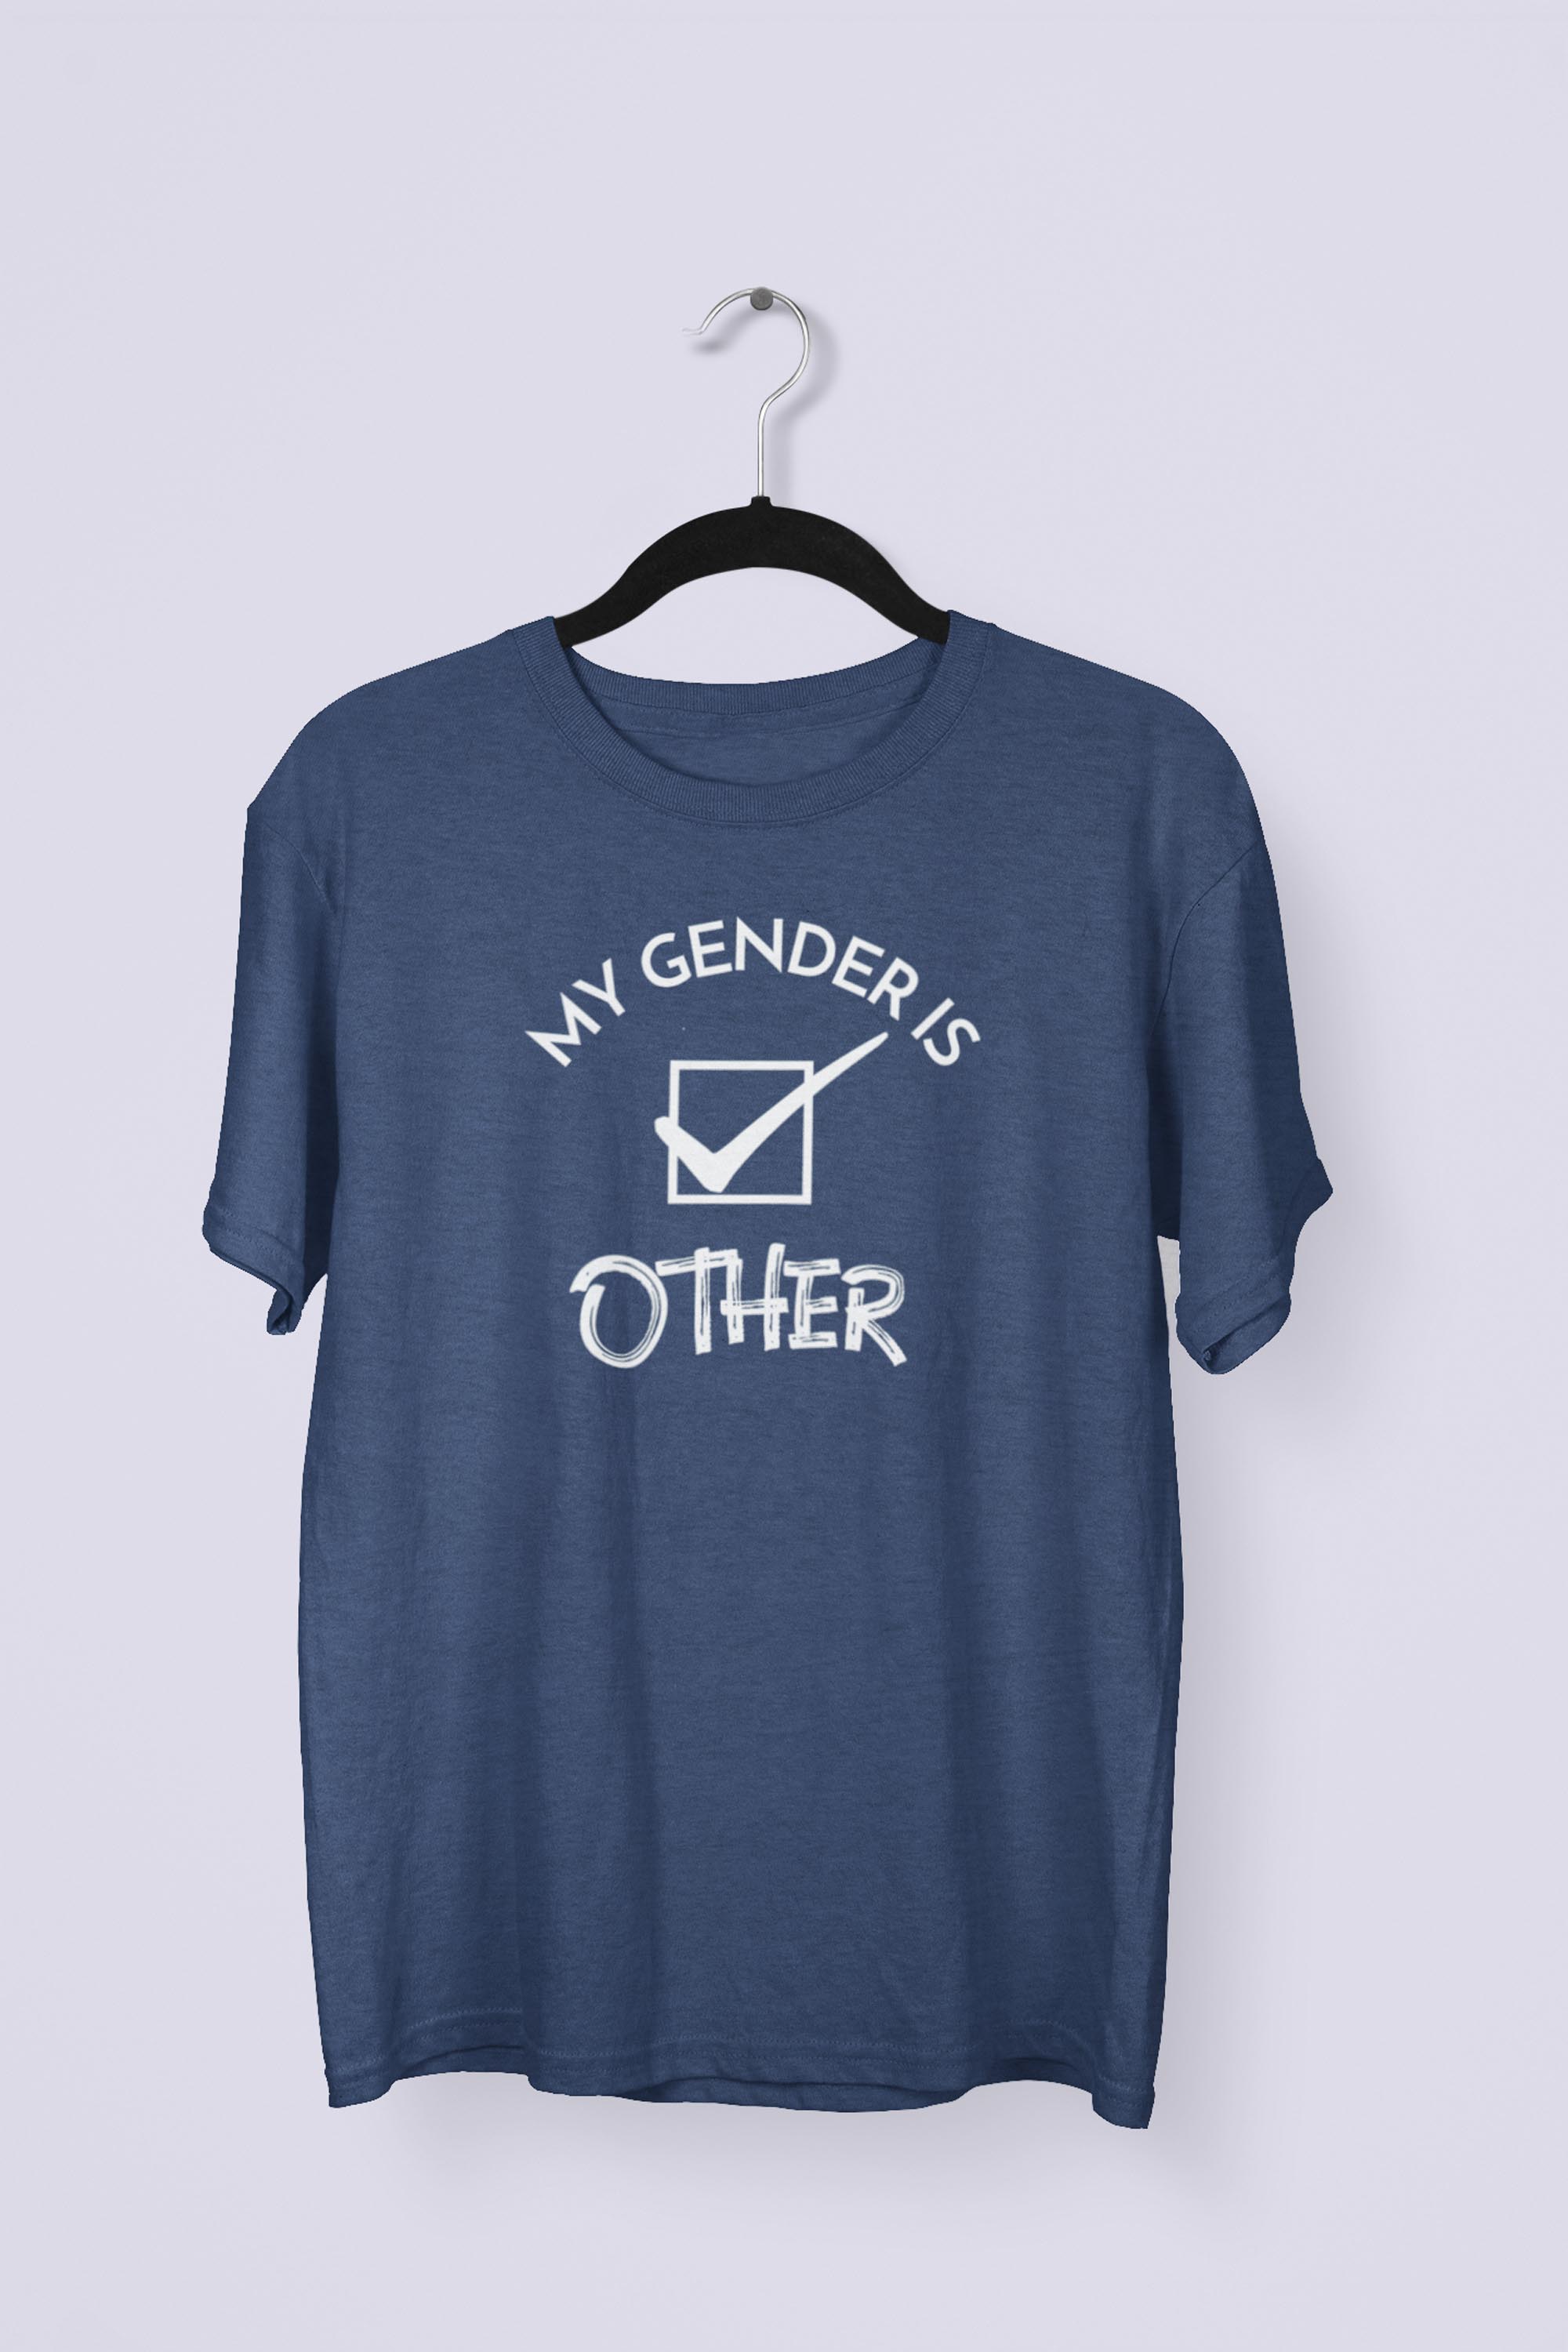 My Gender is Other T-shirt - Heather Navy